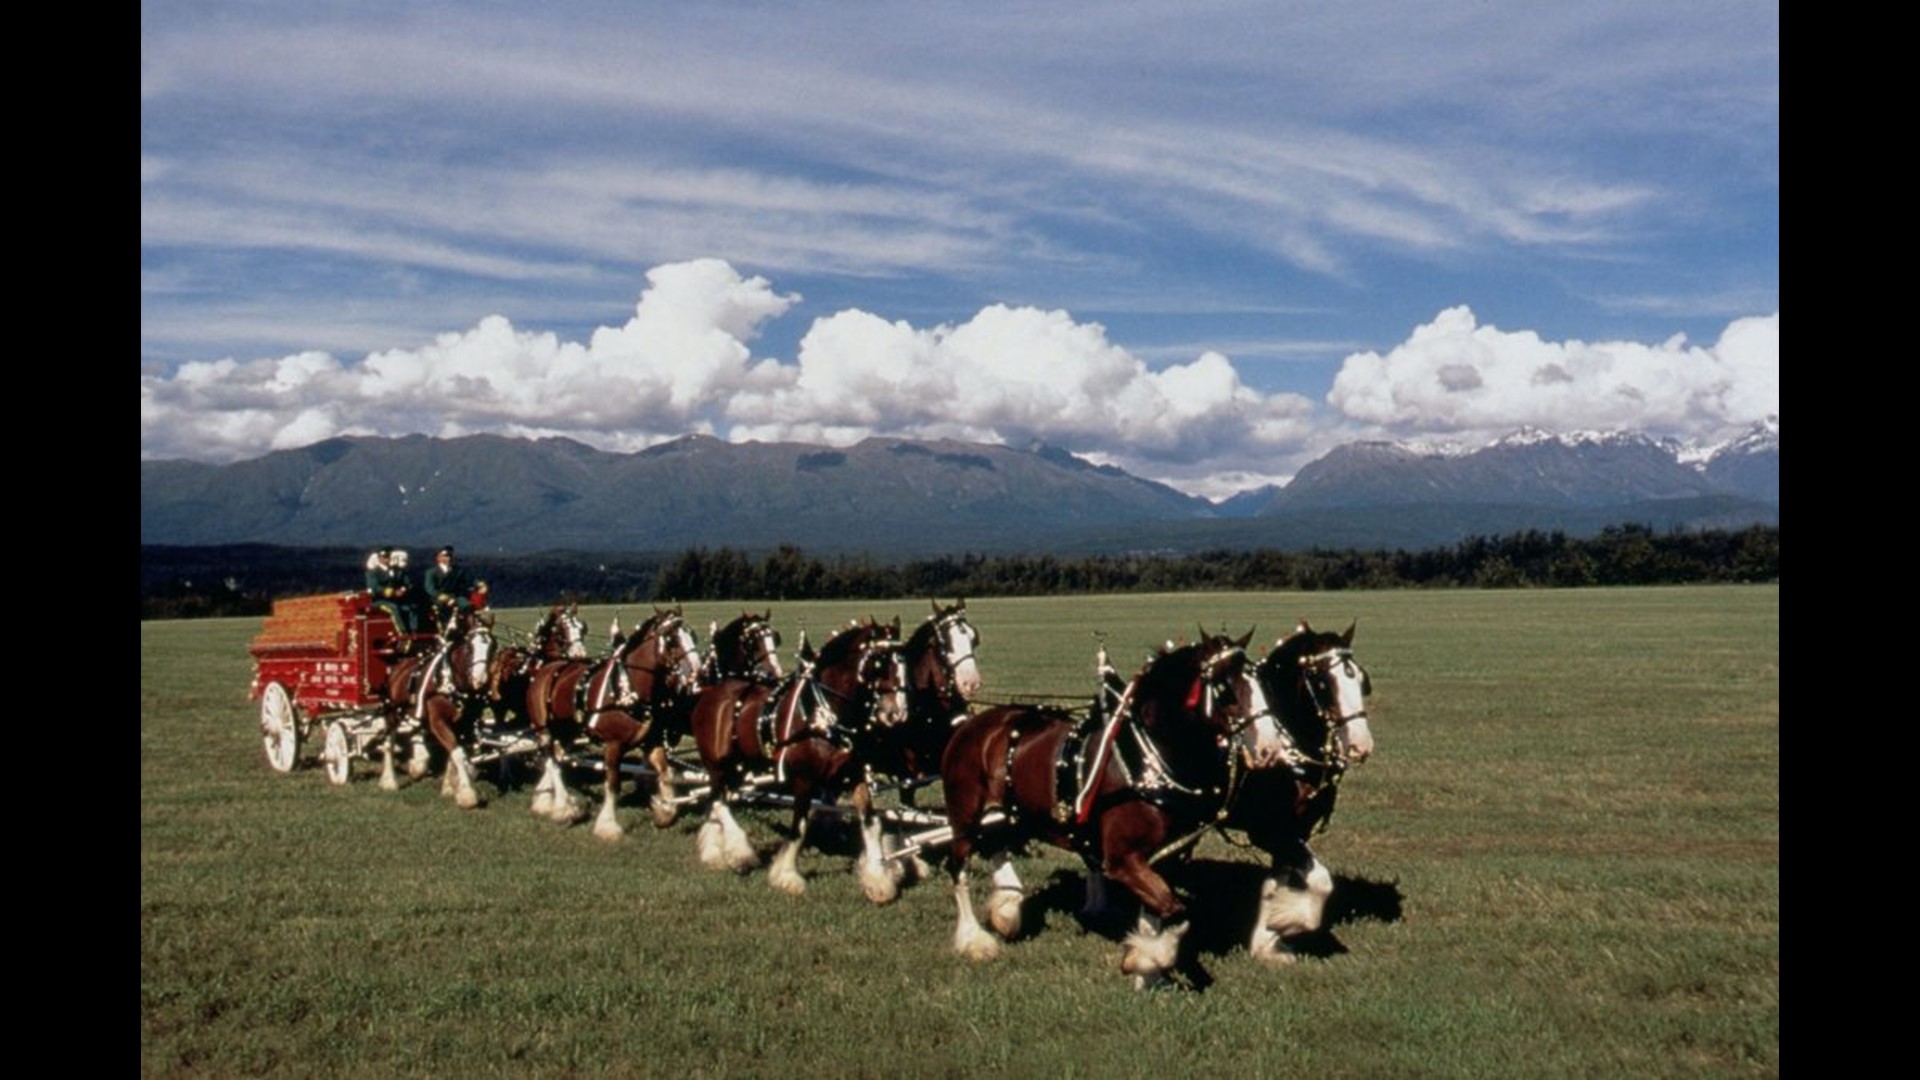 IT ONLY AIRED ONCE Budweiser's iconic Clydesdales pay tribute to 9/11